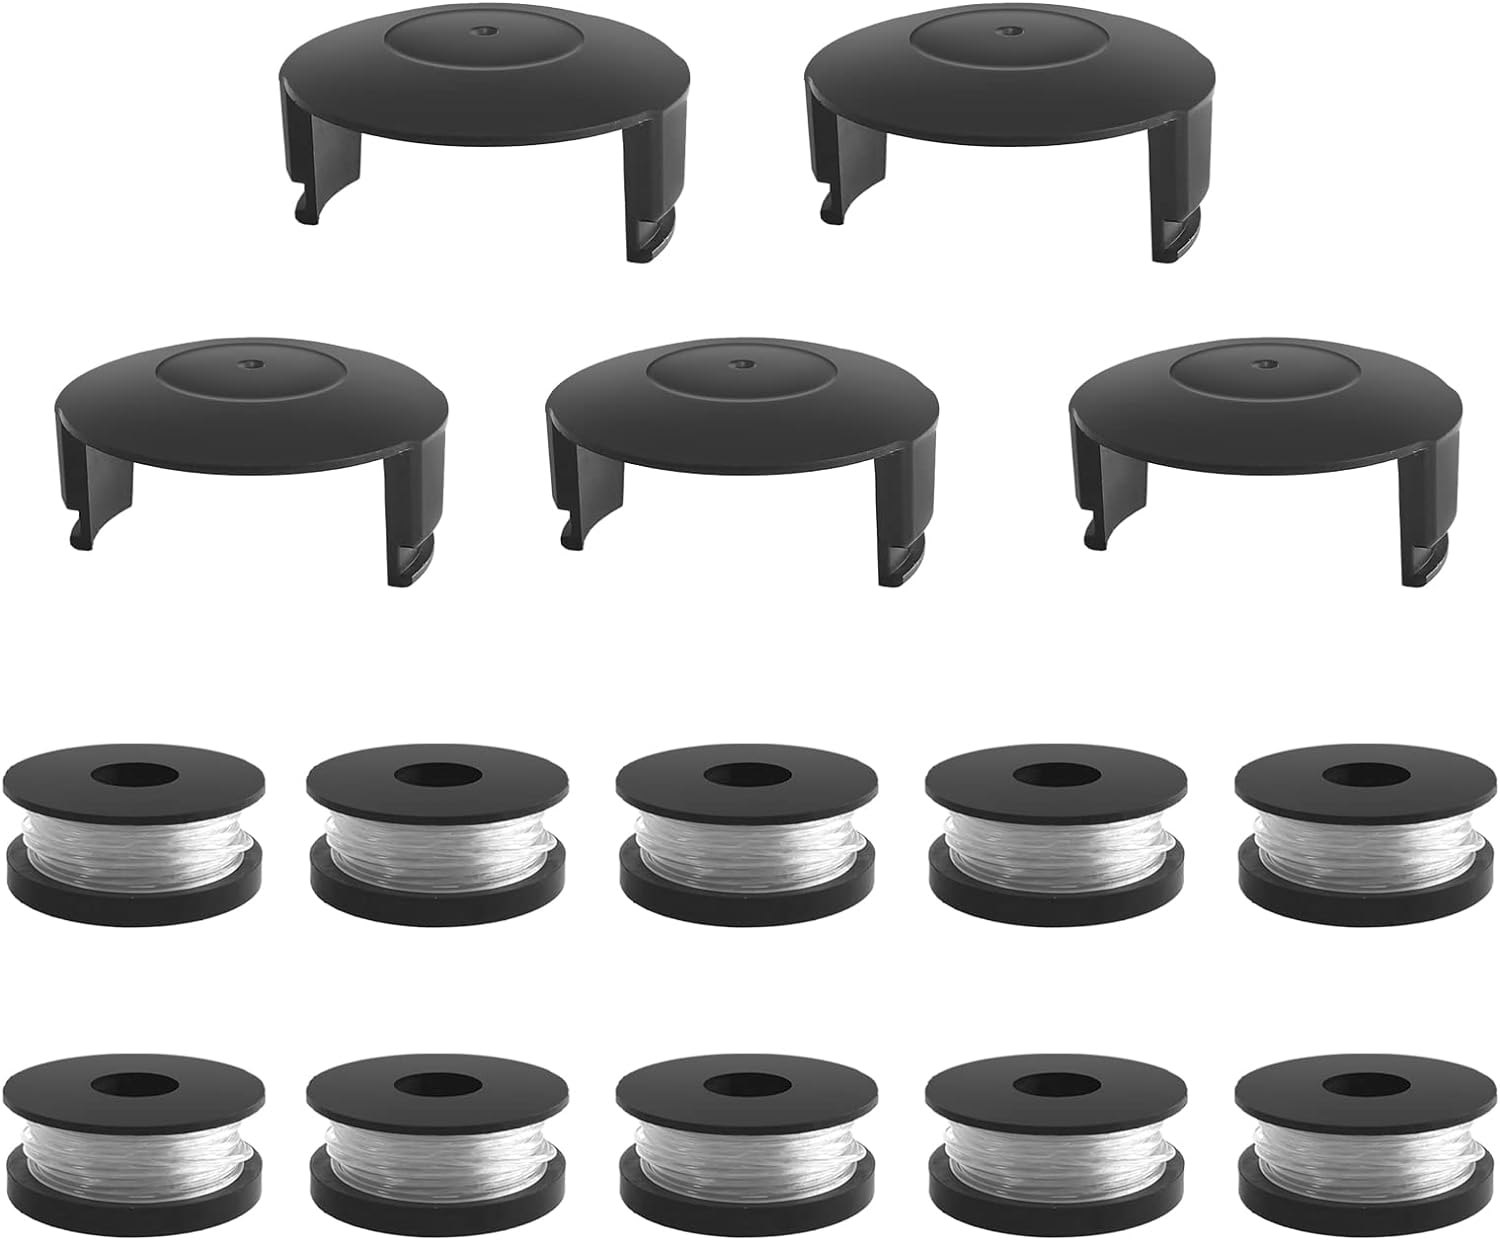 Parts: 10 Pack String Trimmer Replacement Spools Compatible Weed Eater - PS76110A, 10ft 0.065" Dual Line String Trimmer Spool, 10 Spools+5 Caps, PS76110A-WWC